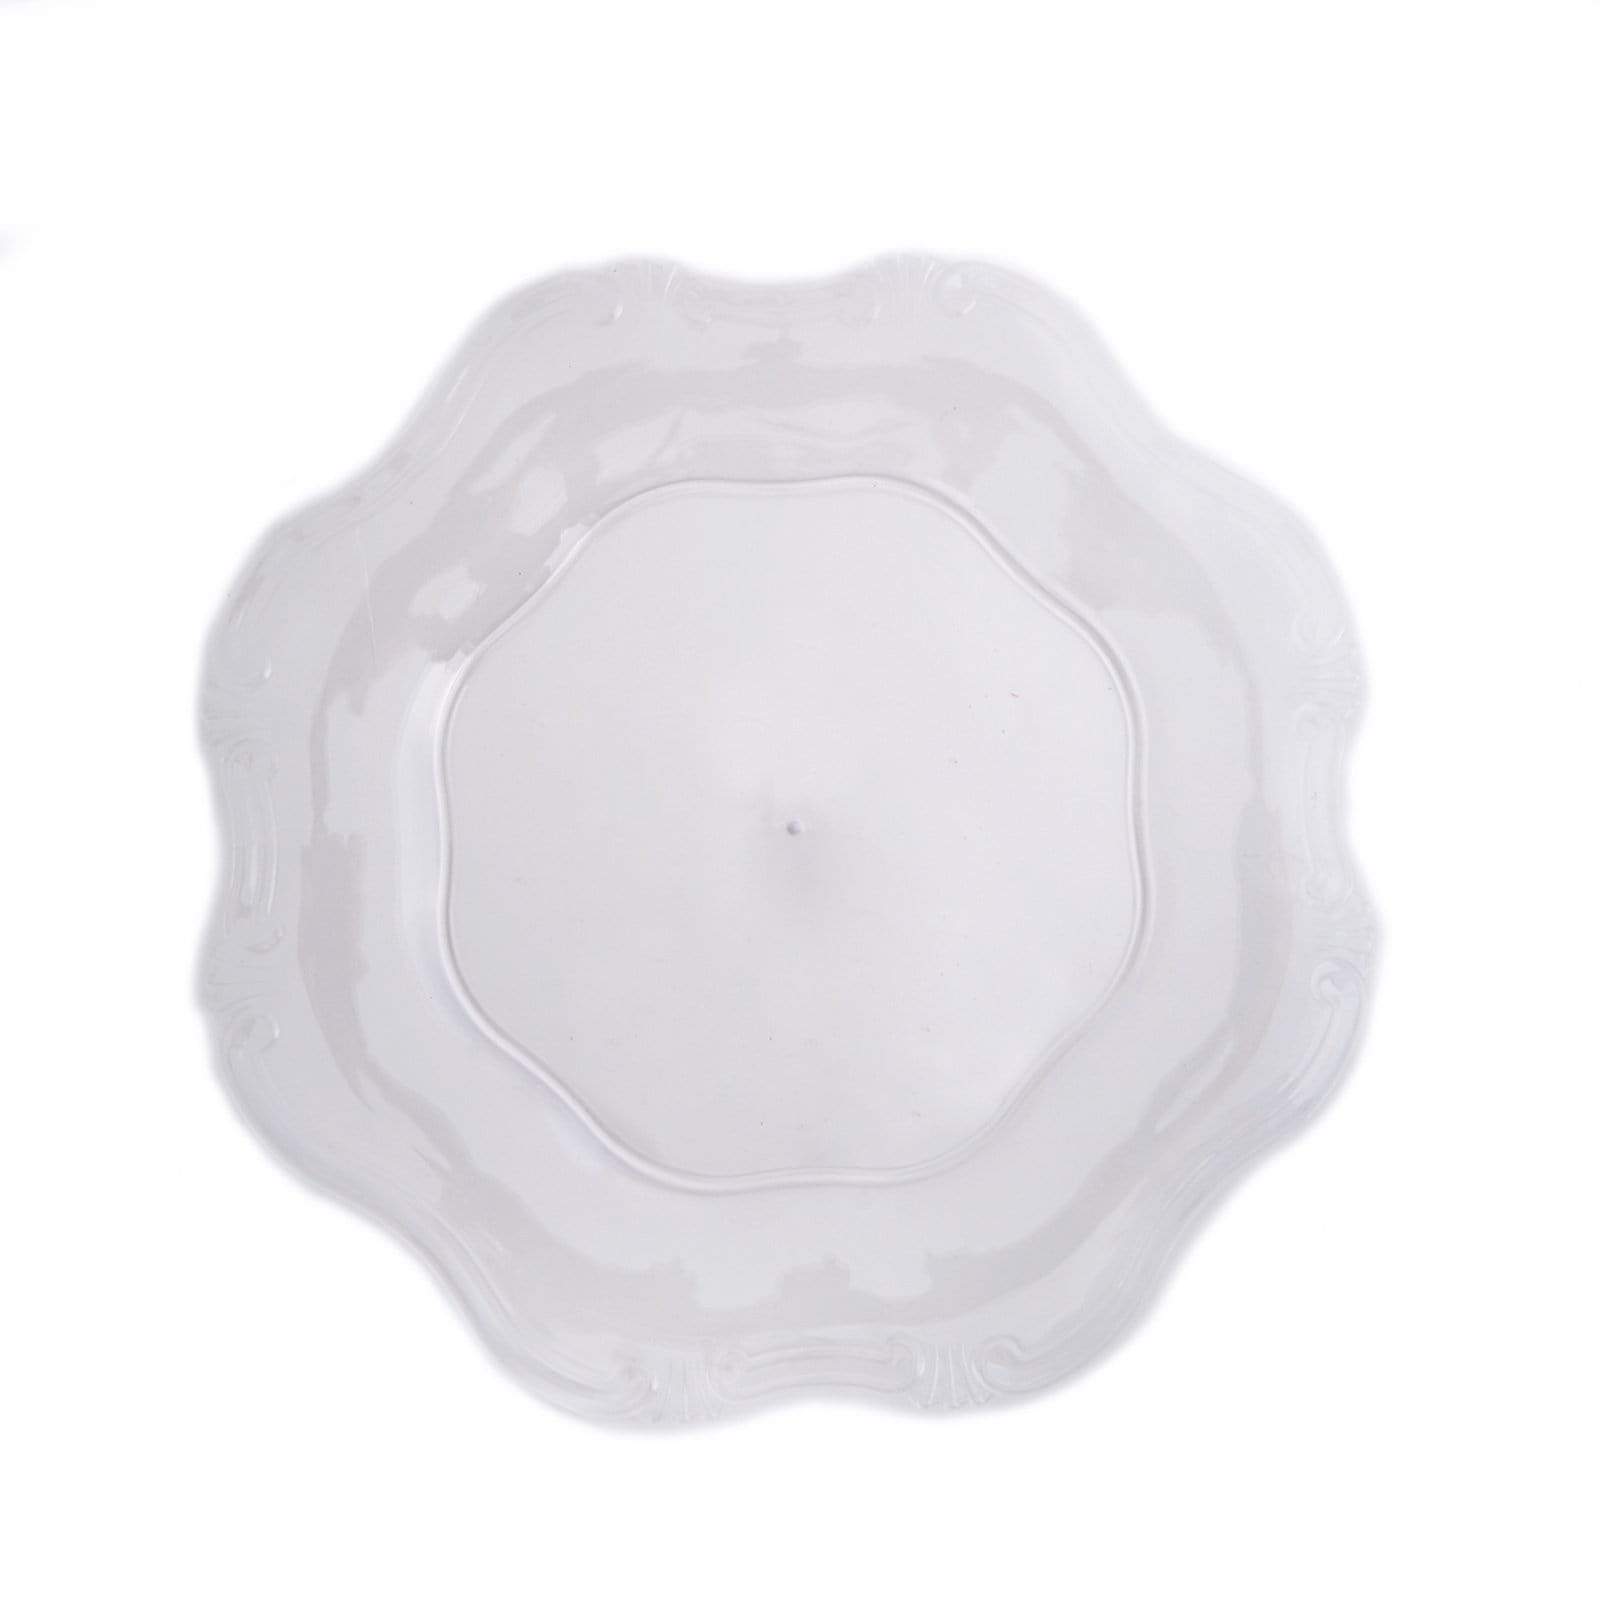 6 pcs 13 in Round Elegant Acrylic Charger Plates